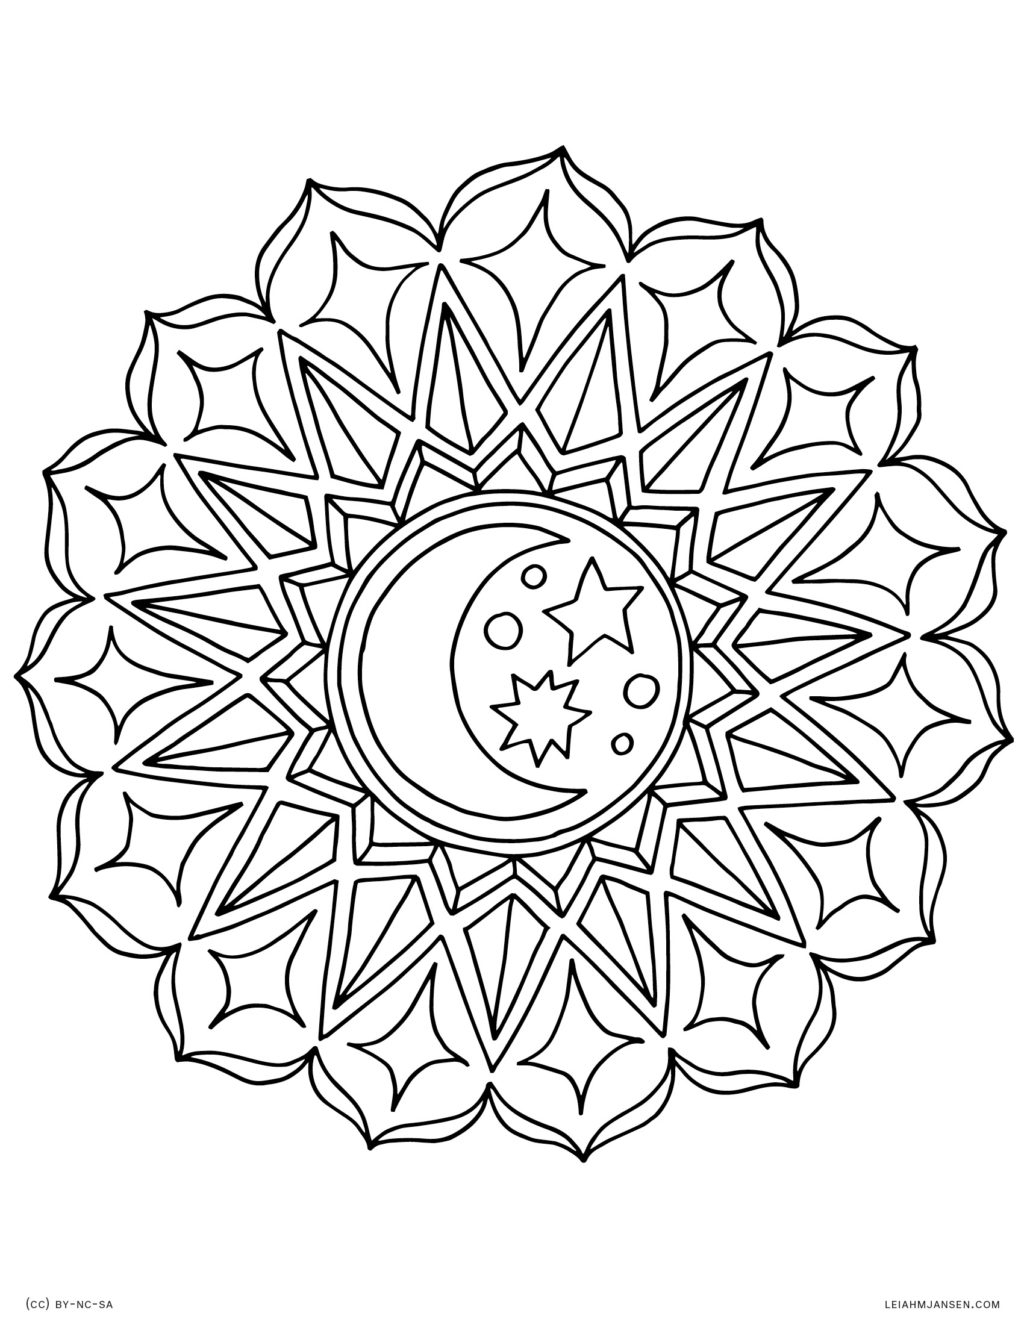 How To Print Coloring Pages Coloring Book World Lmj Coloring Page Moon Mandala Book World